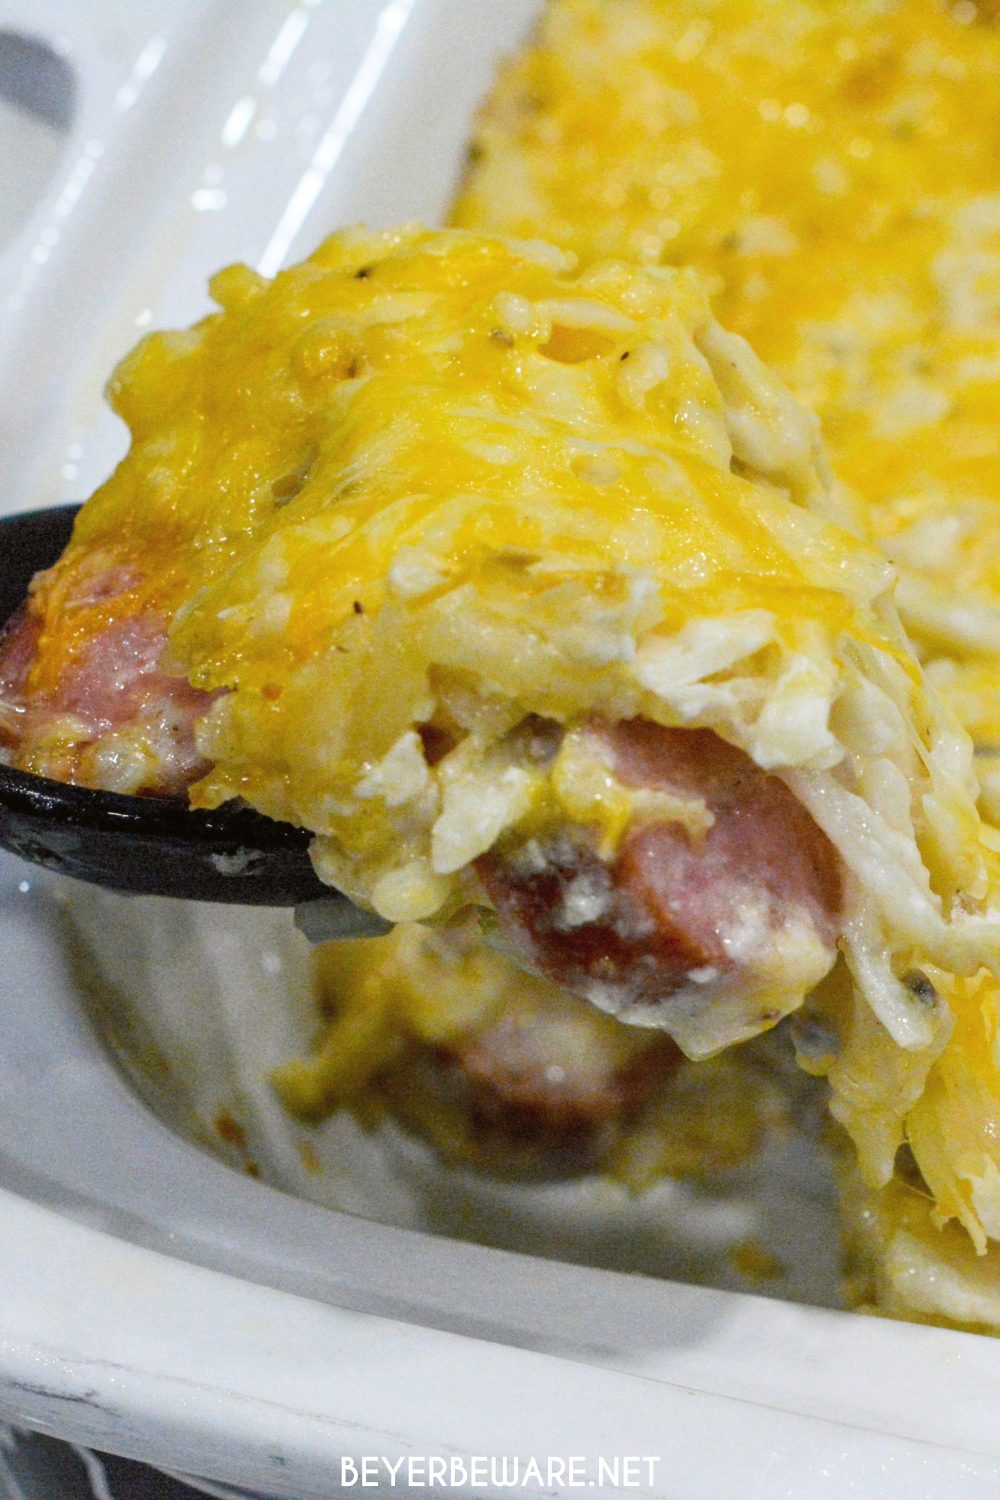 If you love funeral potatoes or hash brown casserole, you will love this casserole crock pot recipe that is filled with smoked sausage and hash brown casserole.